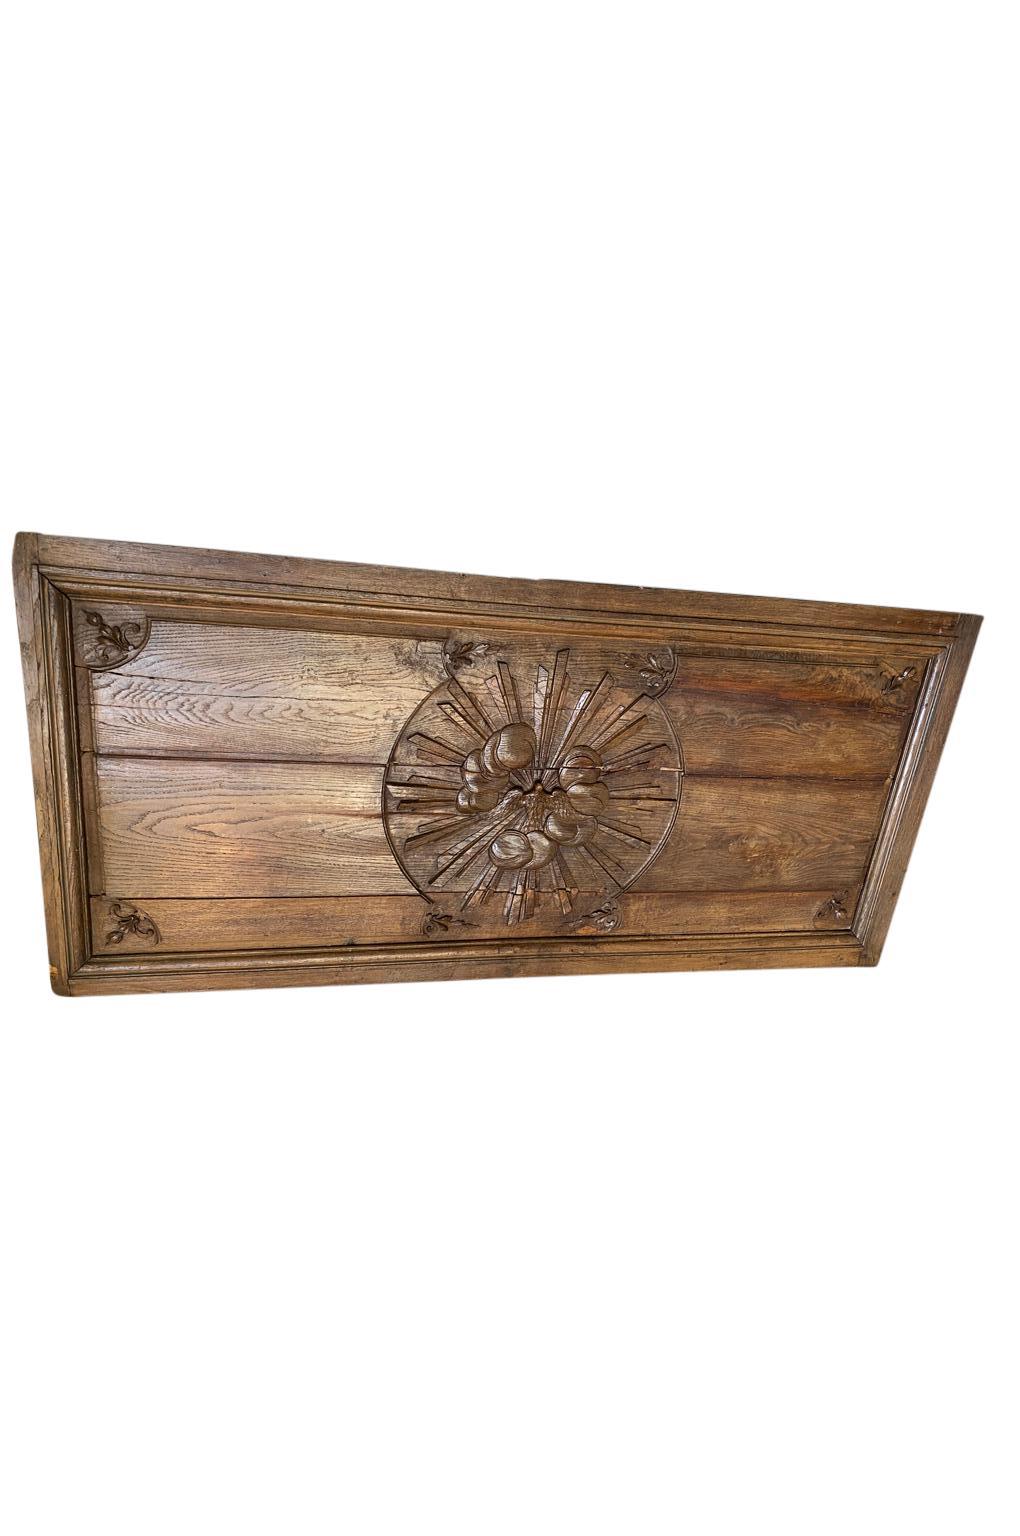 19th Century French Carved Sunburst Panel In Good Condition For Sale In Atlanta, GA